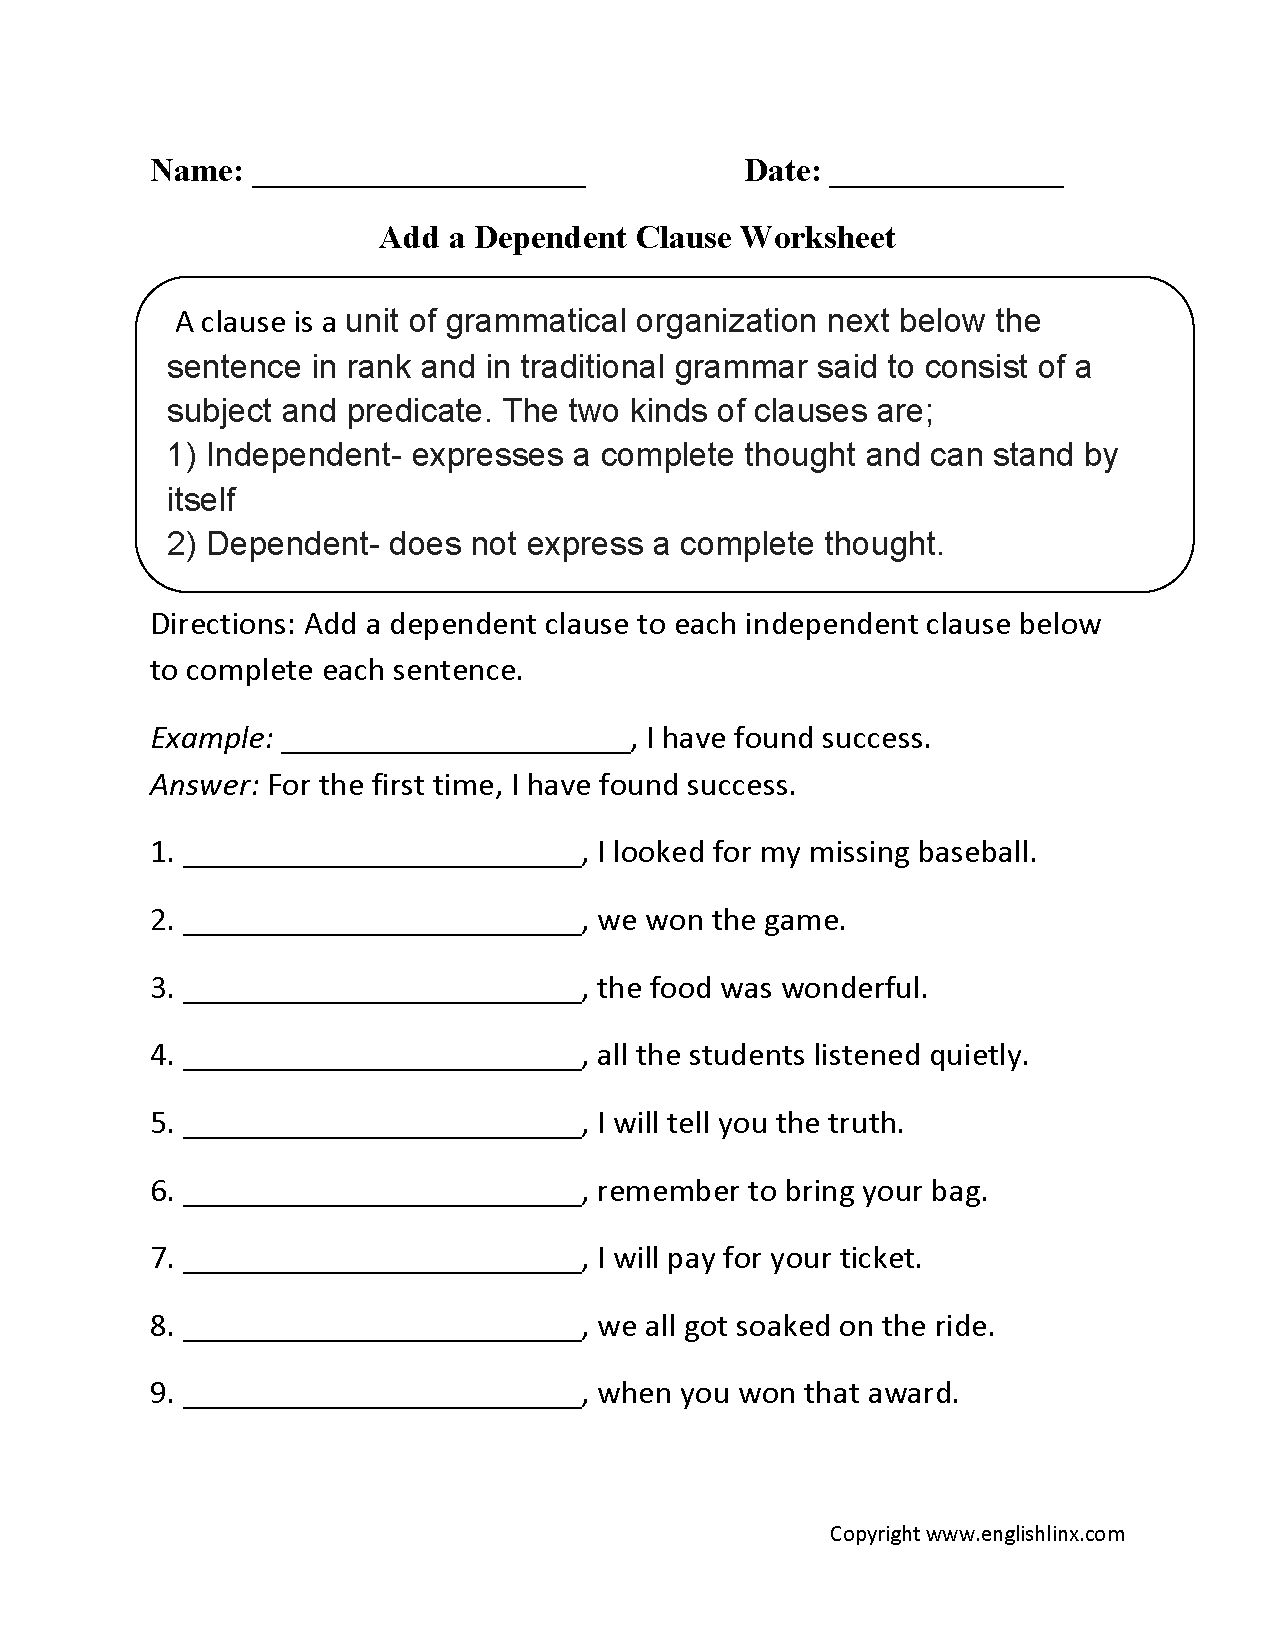 parts-of-speech-worksheets-predicate-adjective-worksheet-grammar-grade-9-adjectiveworksheets